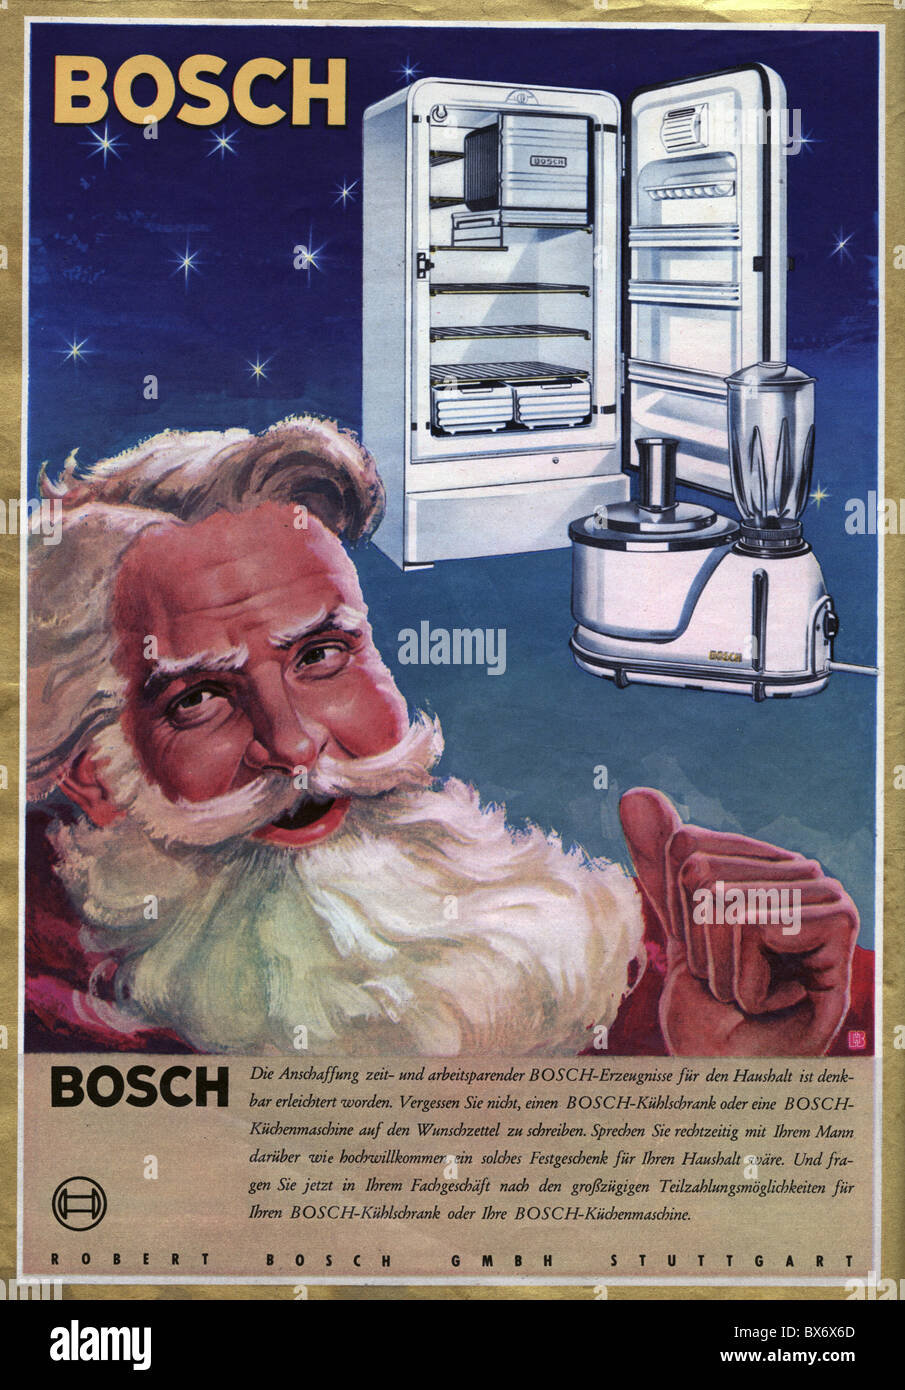 fade bathing evening advertising, houshold appliance, Bosch, advertisement in magazine, 1955,  Additional-Rights-Clearences-Not Available Stock Photo - Alamy